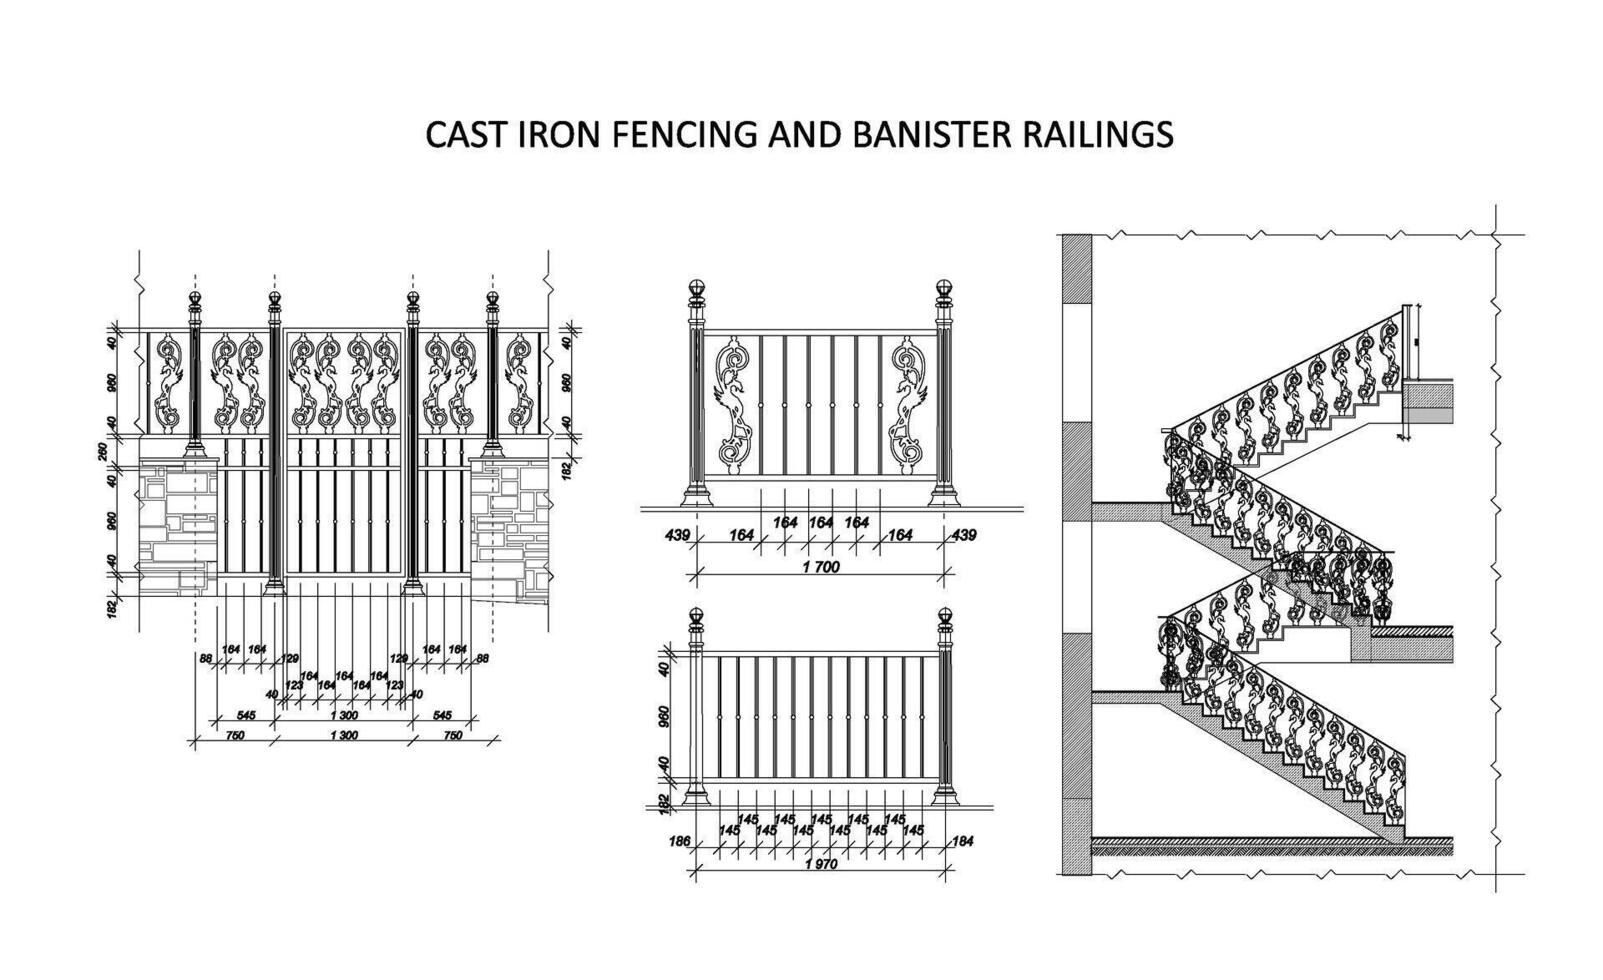 Vector illustration of cast iron fencing and banister railings architectural plan